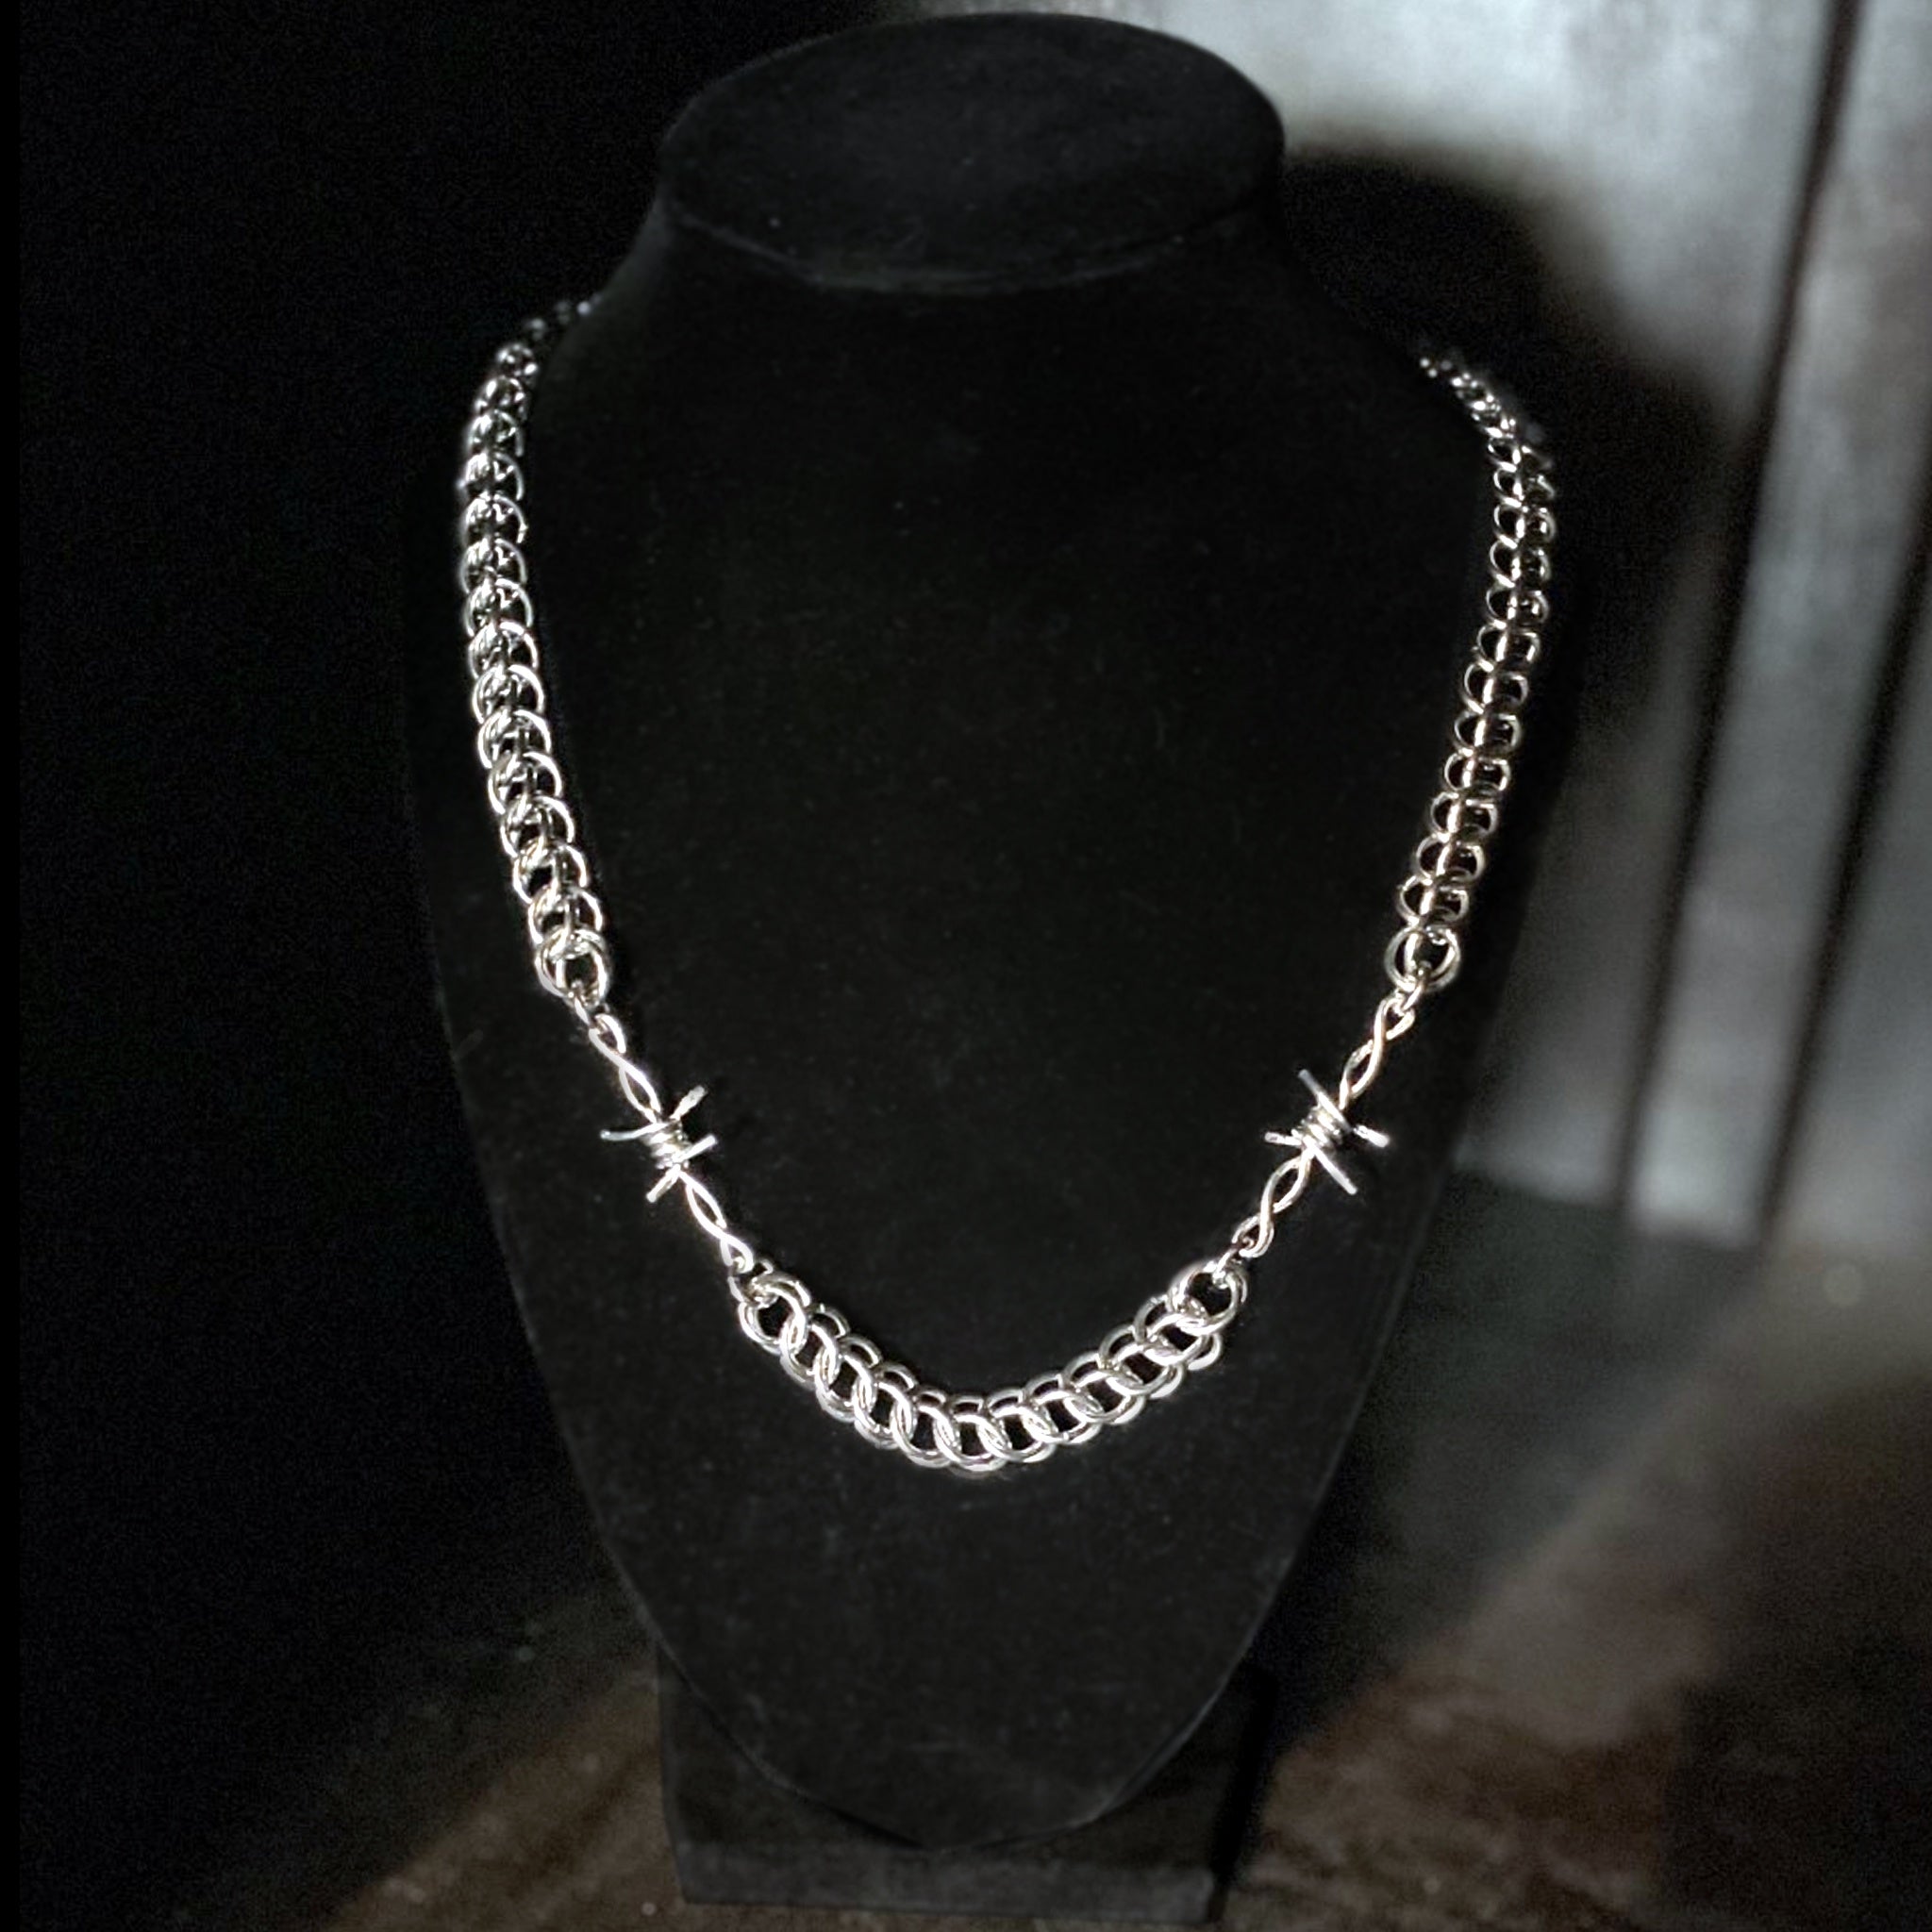 barb wire mail necklace